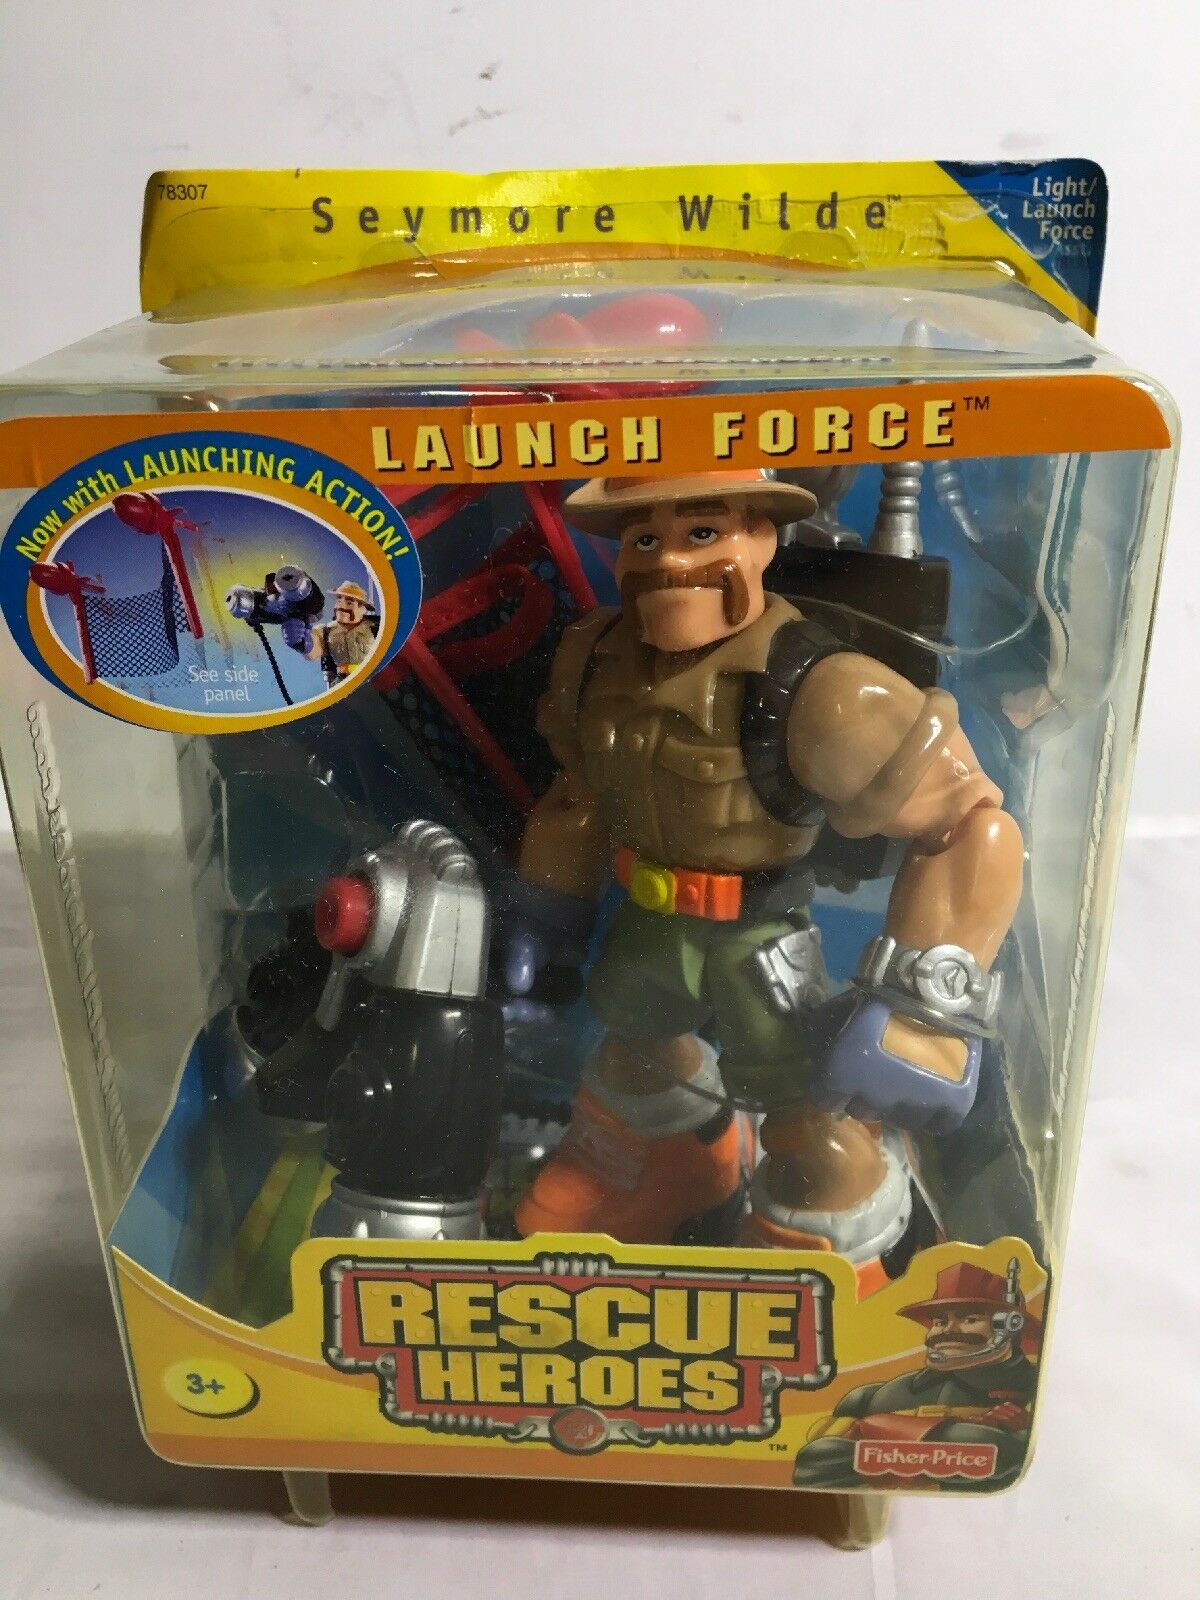 Fisher Rescue Heroes Rocky Canyon Action Figure Launch Force 2001 for sale online